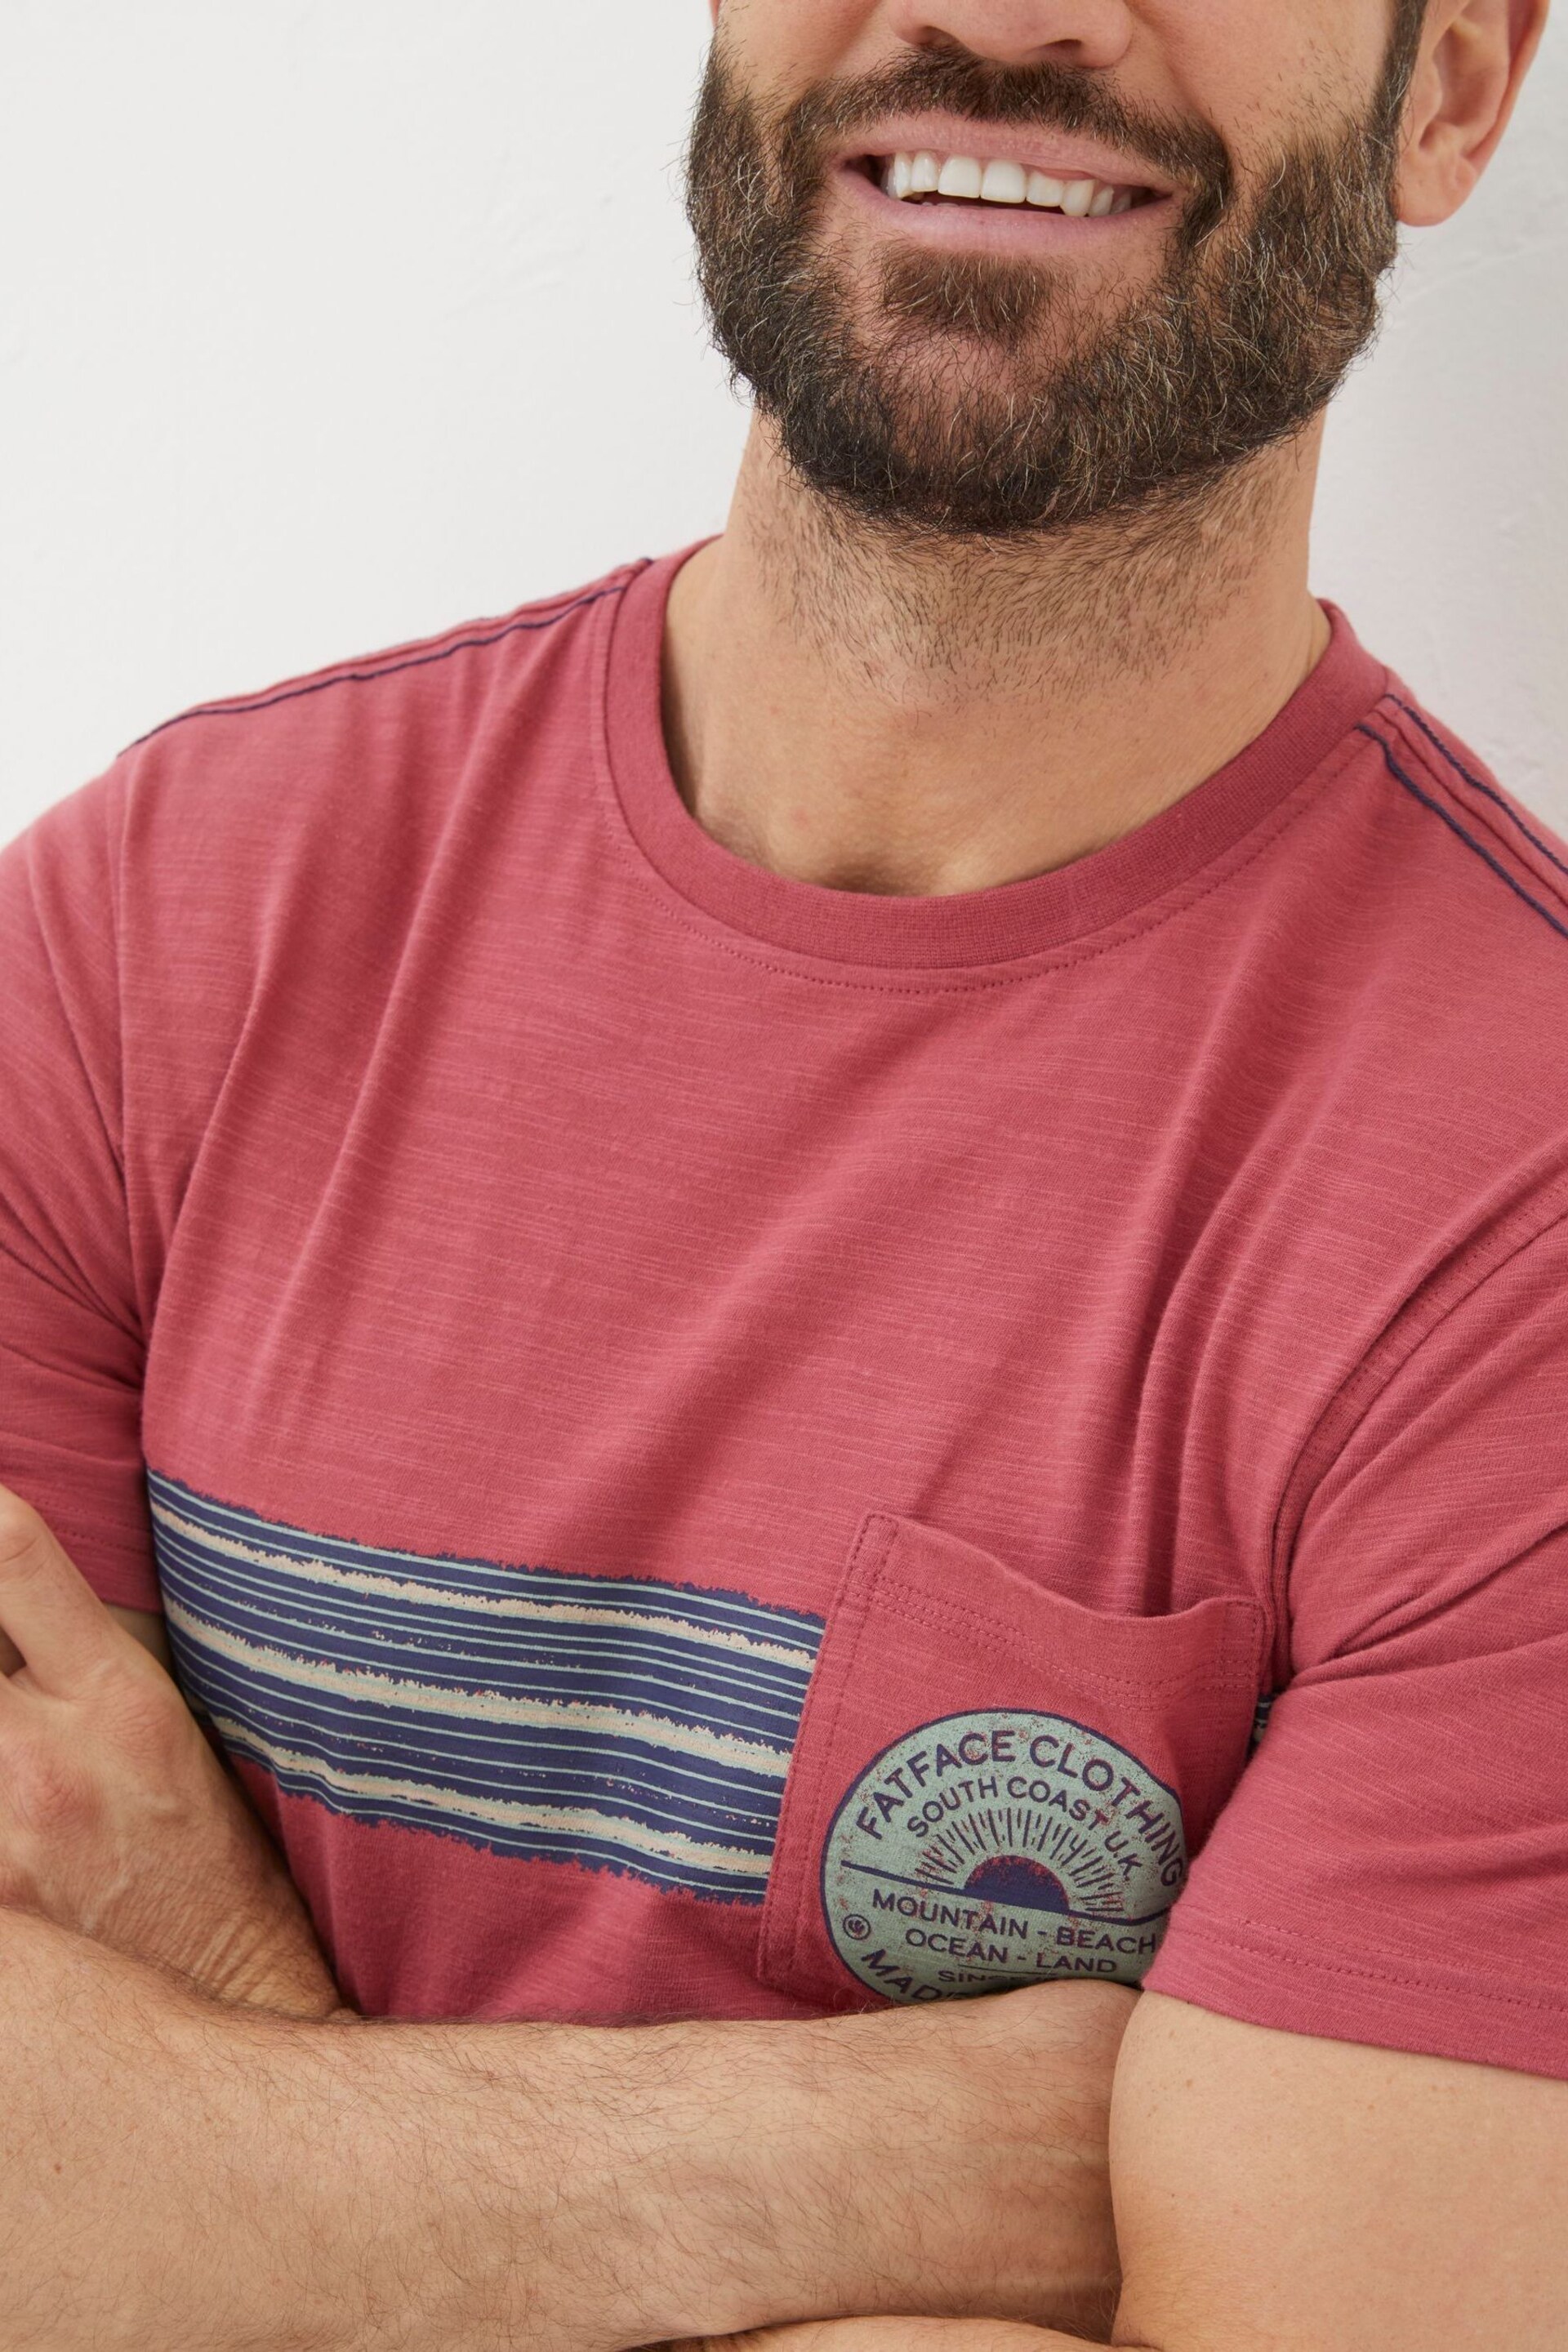 FatFace Pink Chest Stripe Badge T-Shirt - Image 4 of 5